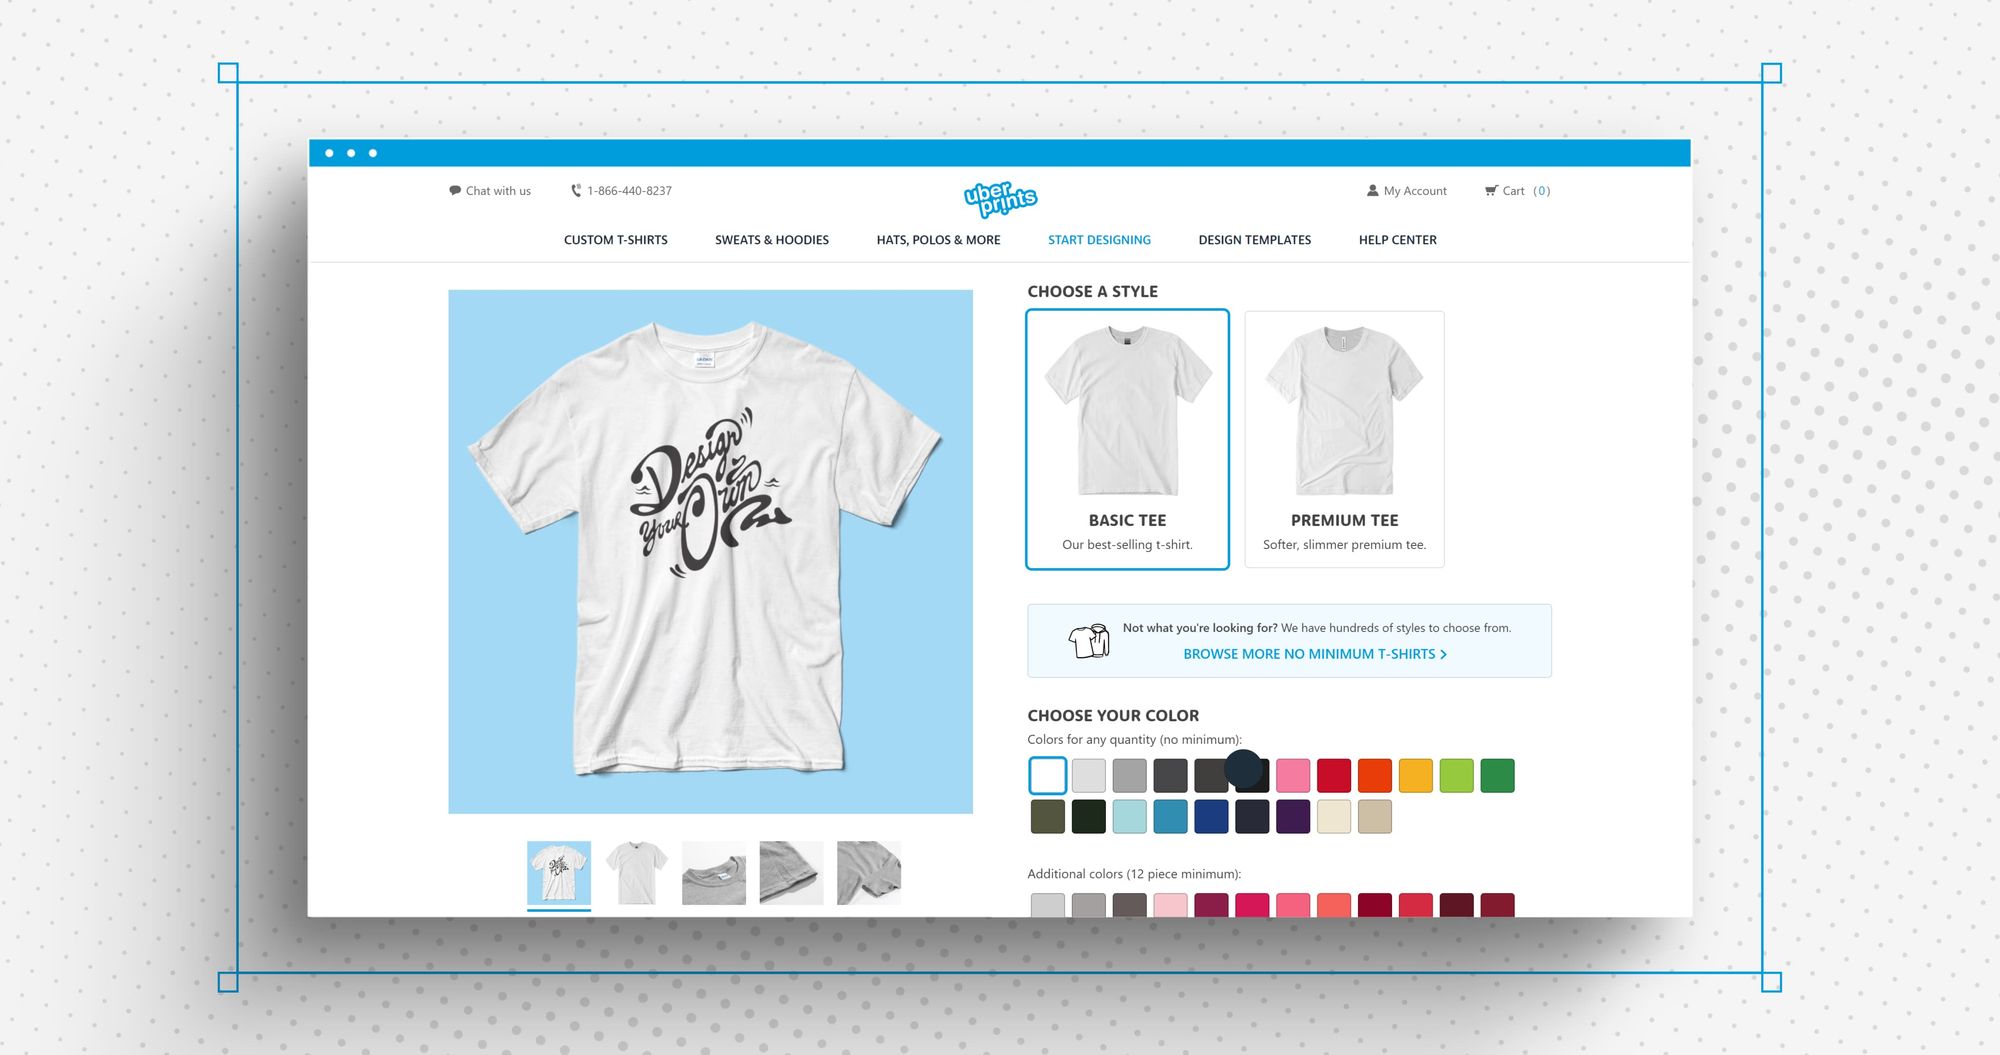 A screenshot which shows all the color options available for the Basic Tee and the Premium Tee.